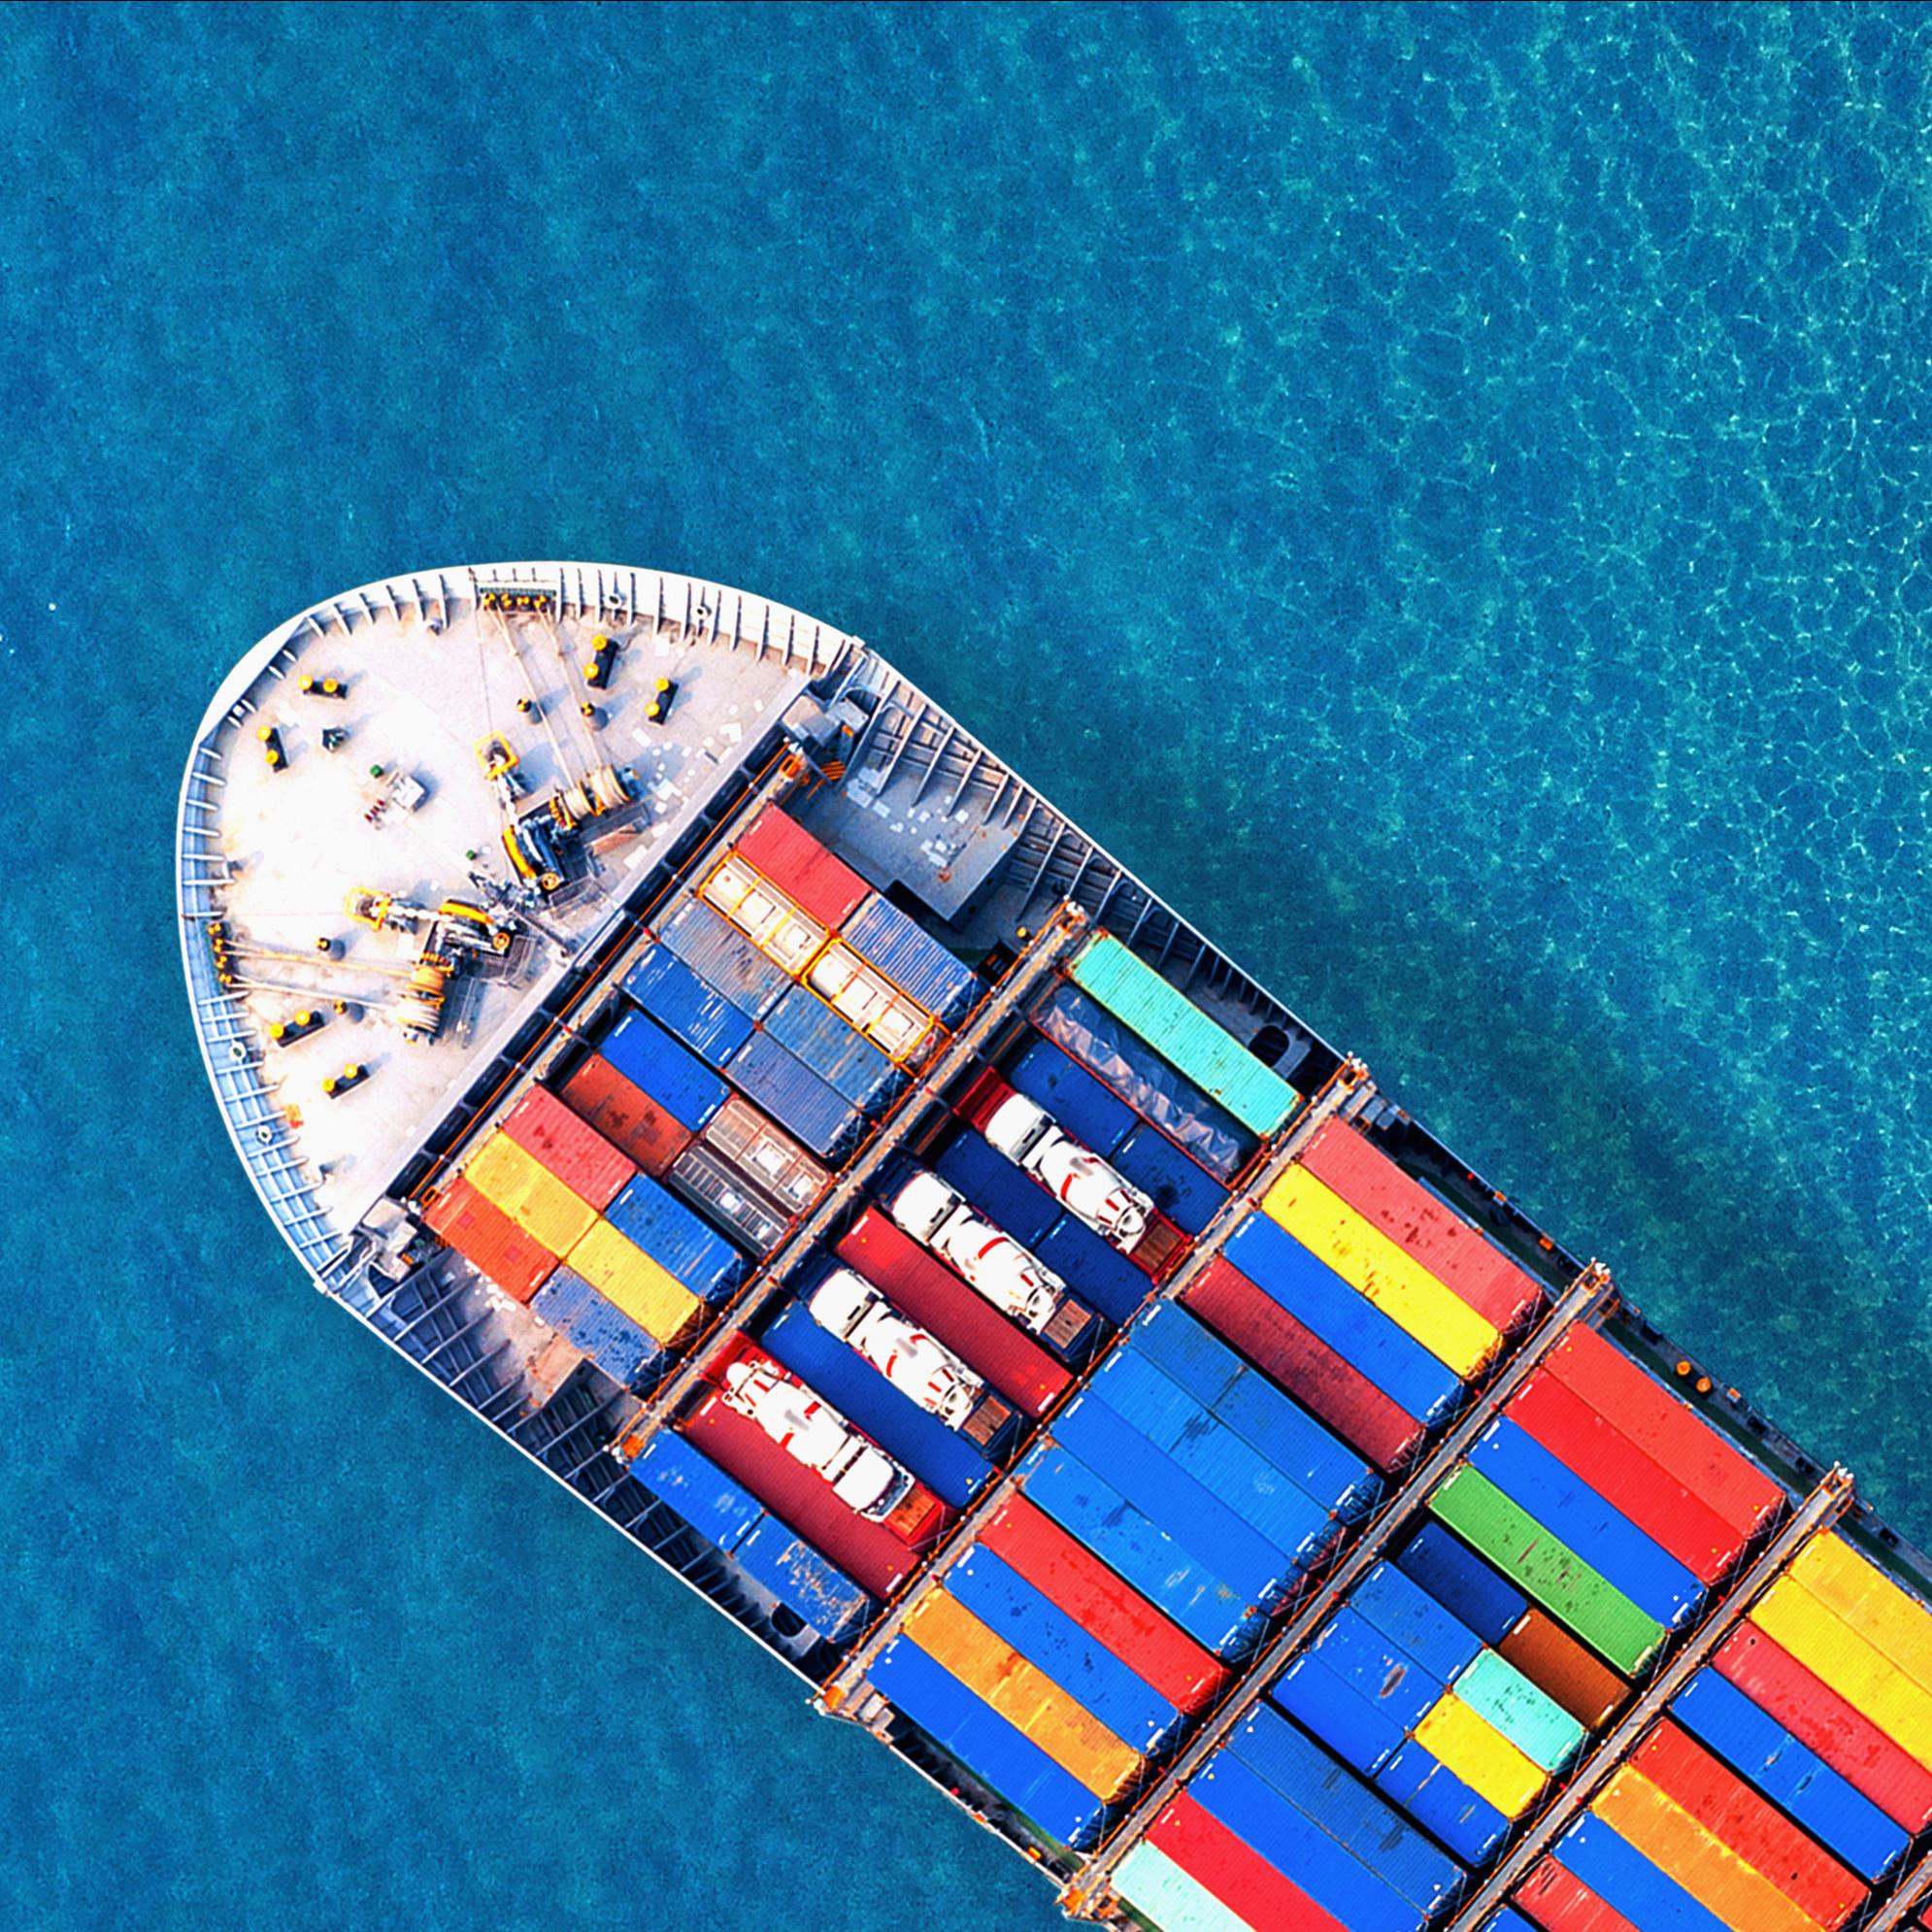 Maritime transport accounts for about 80% of all goods transported in terms of tonnes.